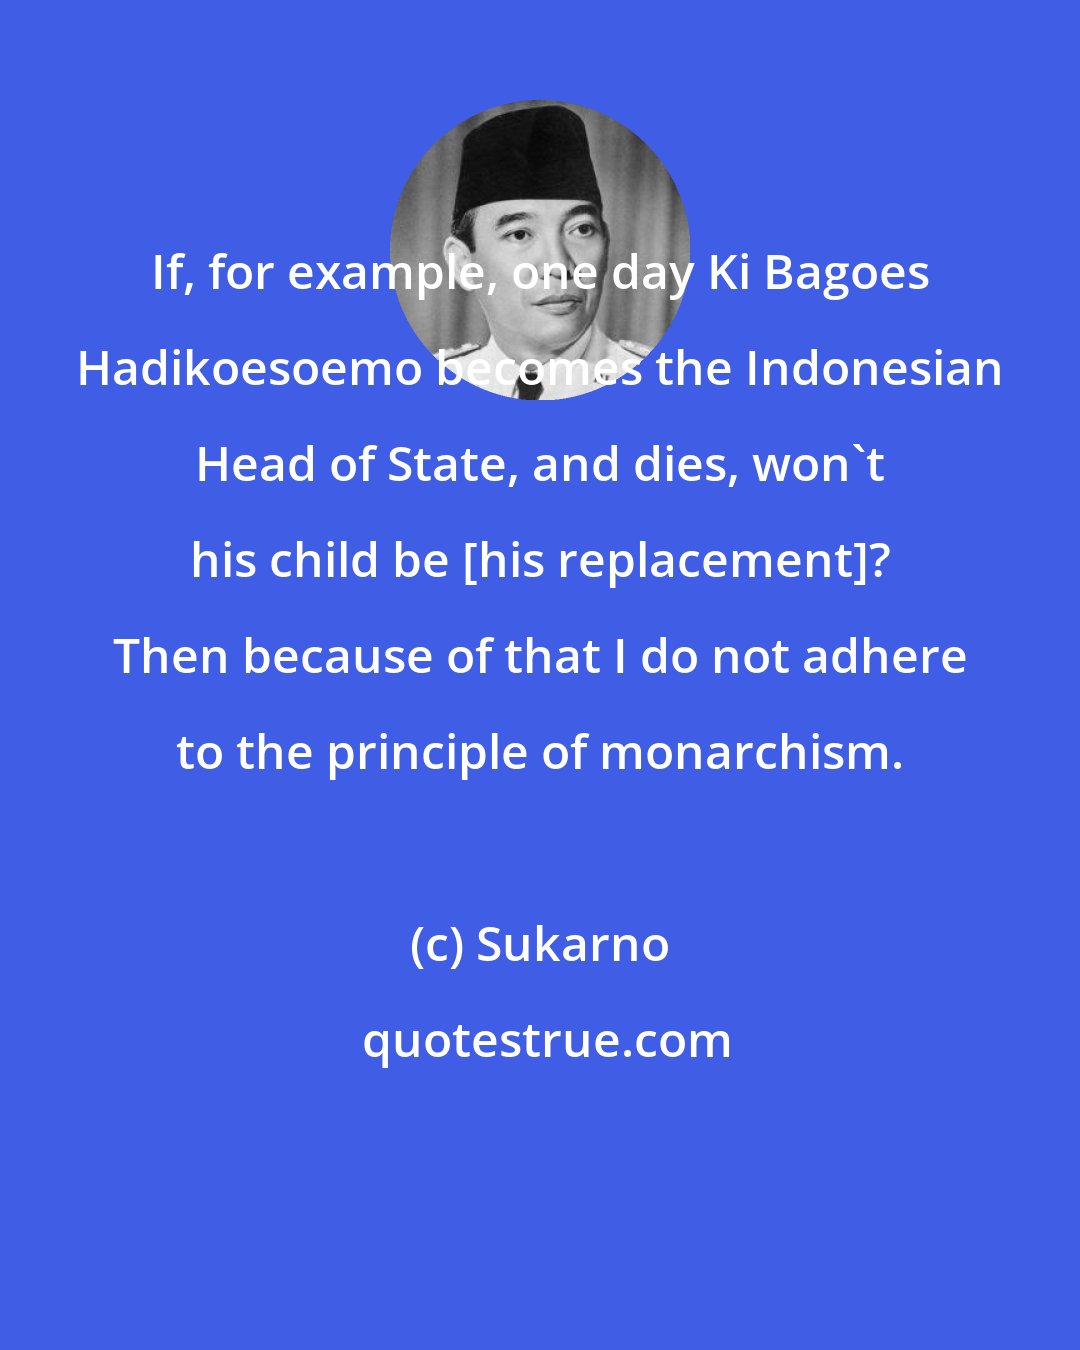 Sukarno: If, for example, one day Ki Bagoes Hadikoesoemo becomes the Indonesian Head of State, and dies, won't his child be [his replacement]? Then because of that I do not adhere to the principle of monarchism.